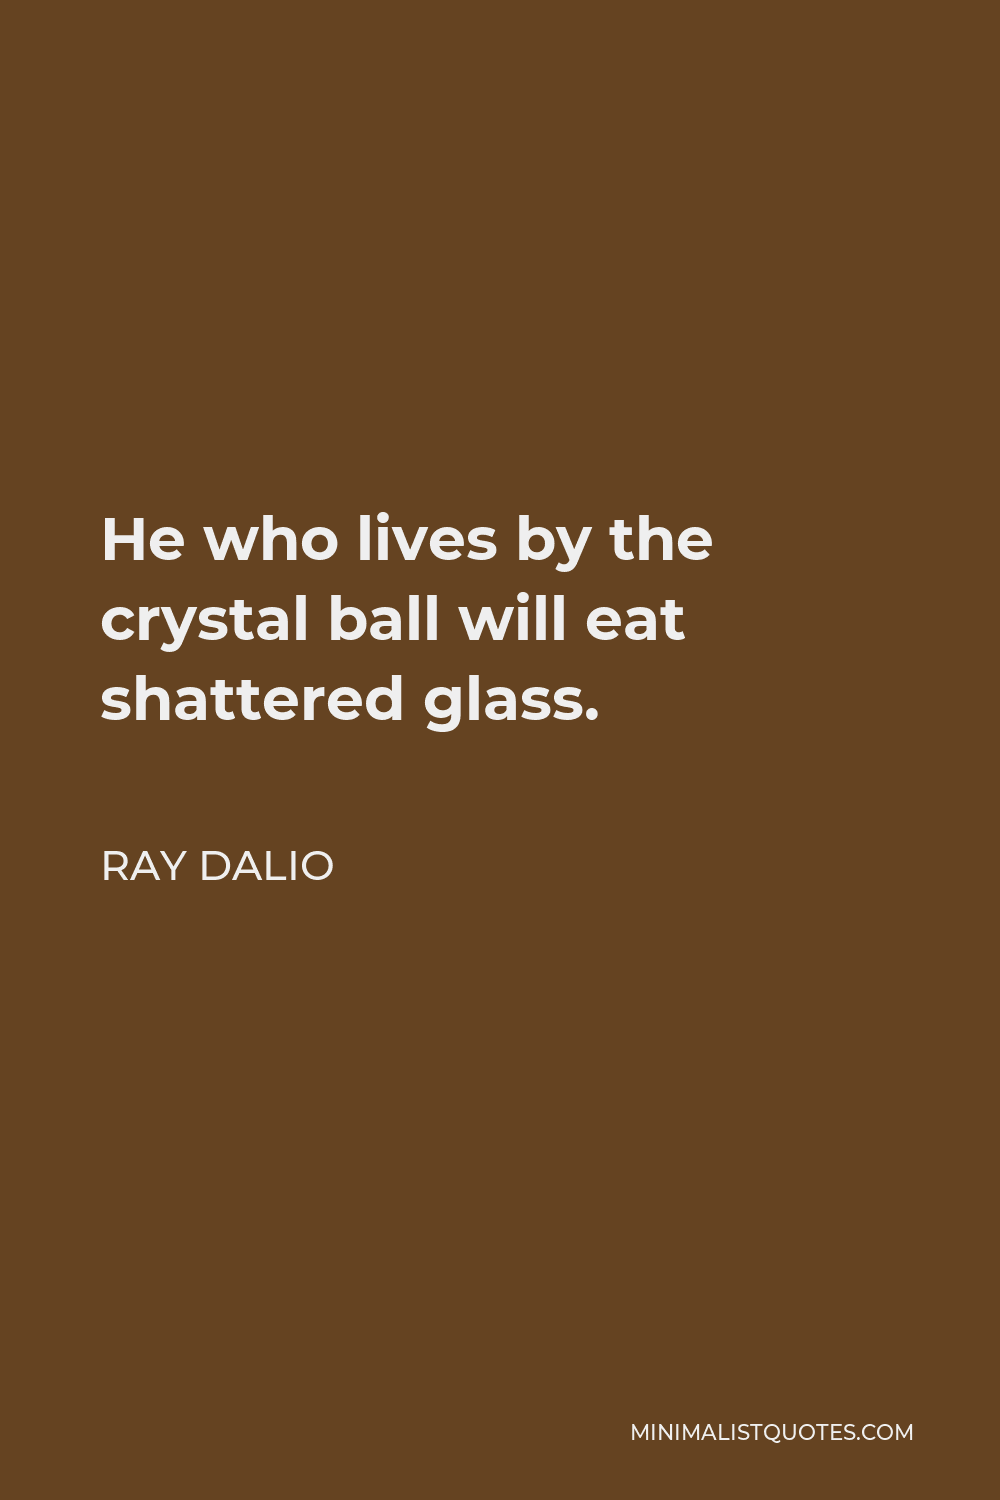 Ray Dalio Quote - He who lives by the crystal ball will eat shattered glass.